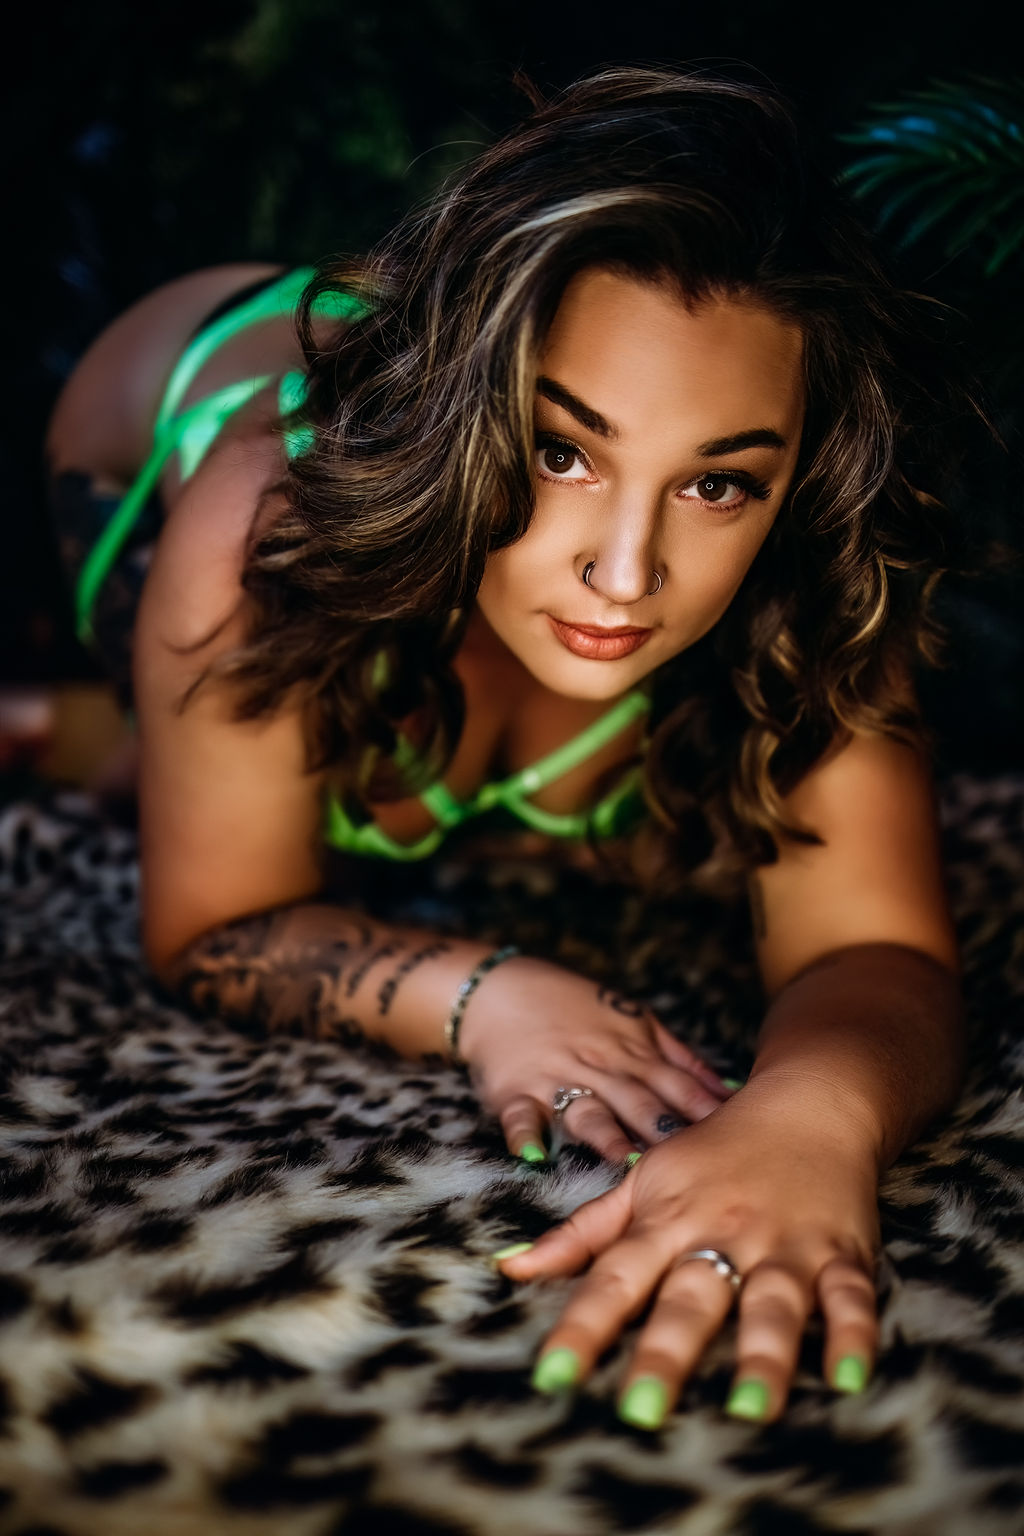 A woman in neon green lingerie crawls across a leopard print rug microblading annapolis